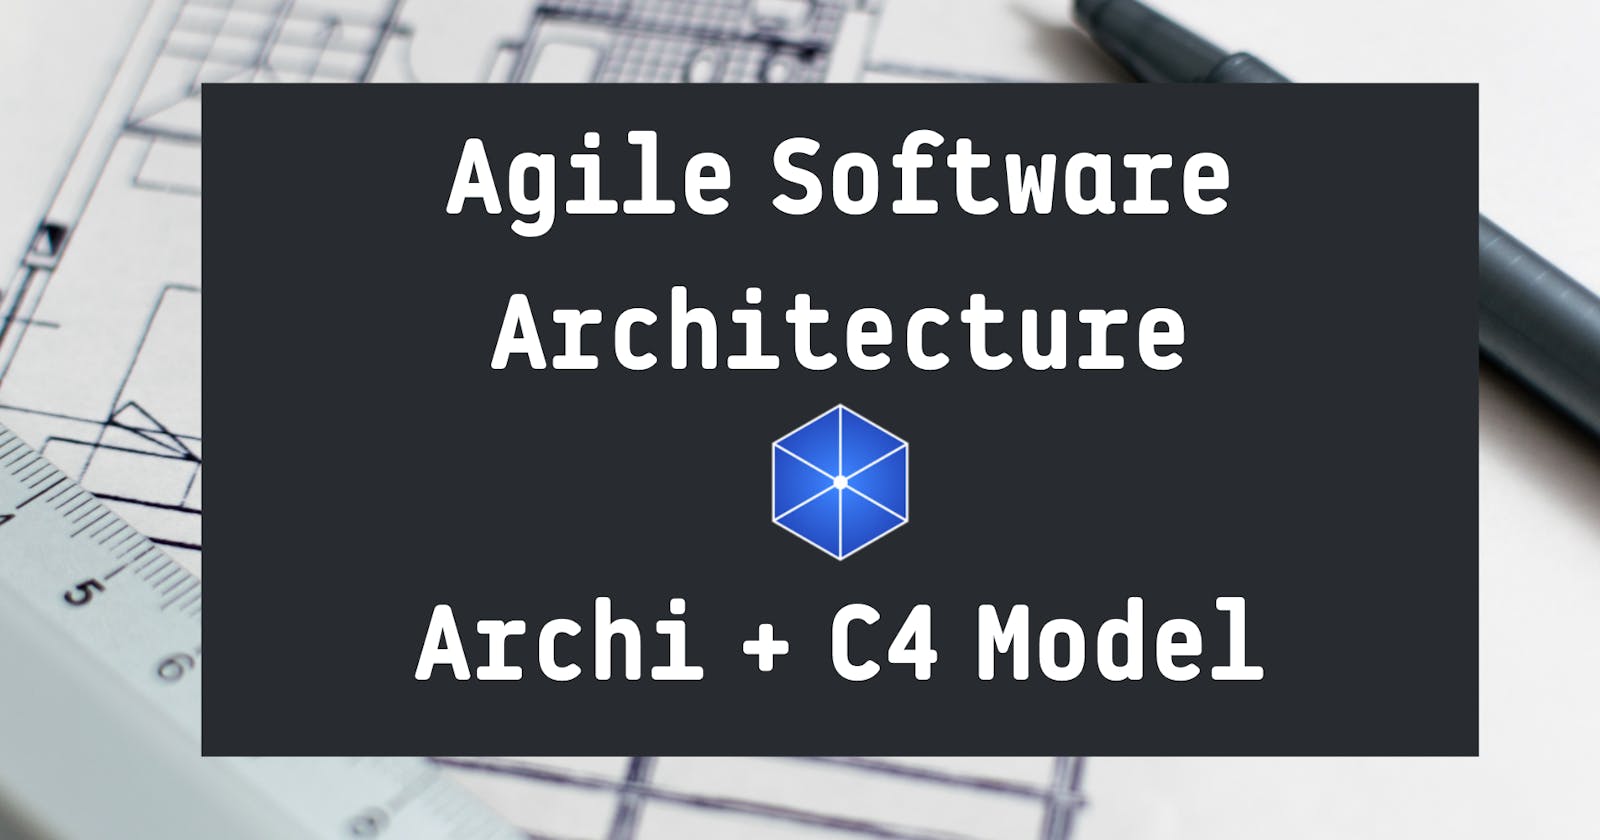 Agile Software Architecture using Archimate and the C4 Model